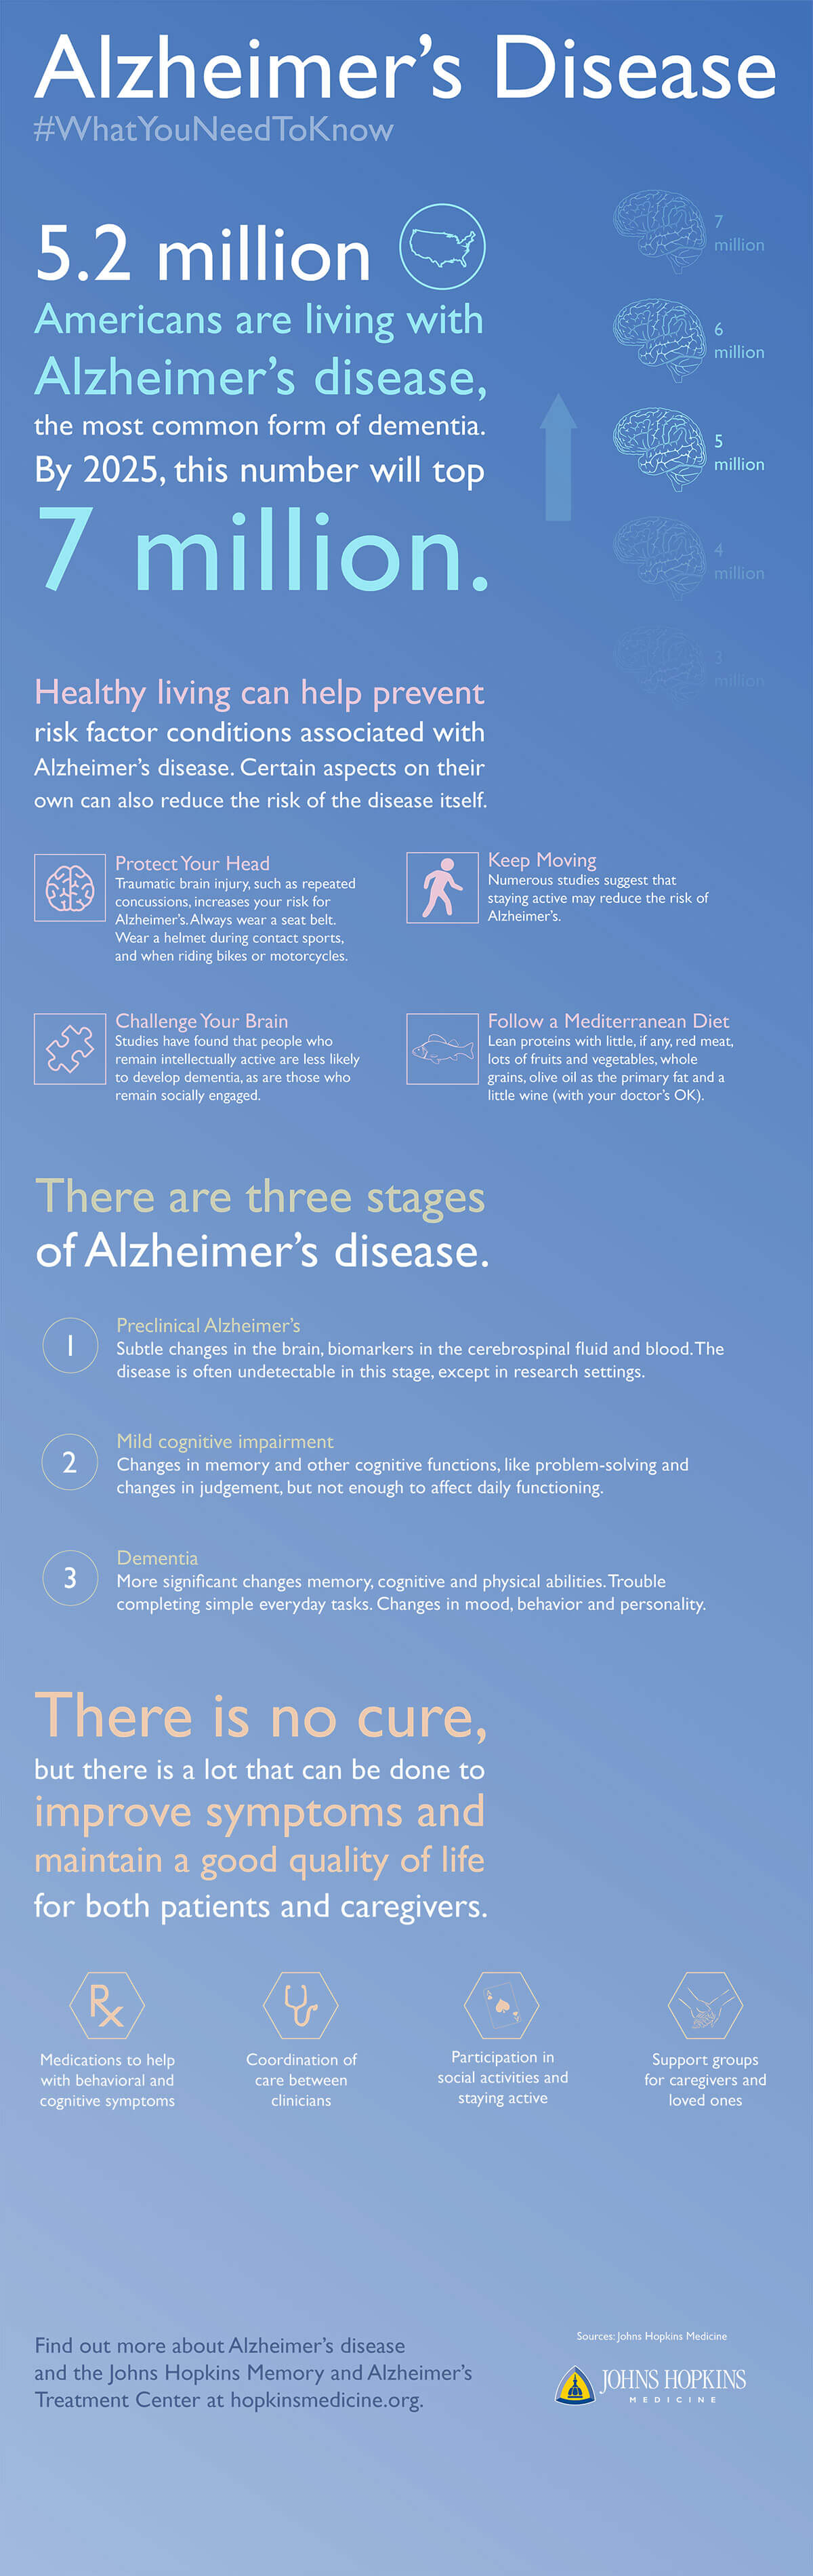 An infographic detailing risk factors, stages and treatment options of Alzheimer's disease.